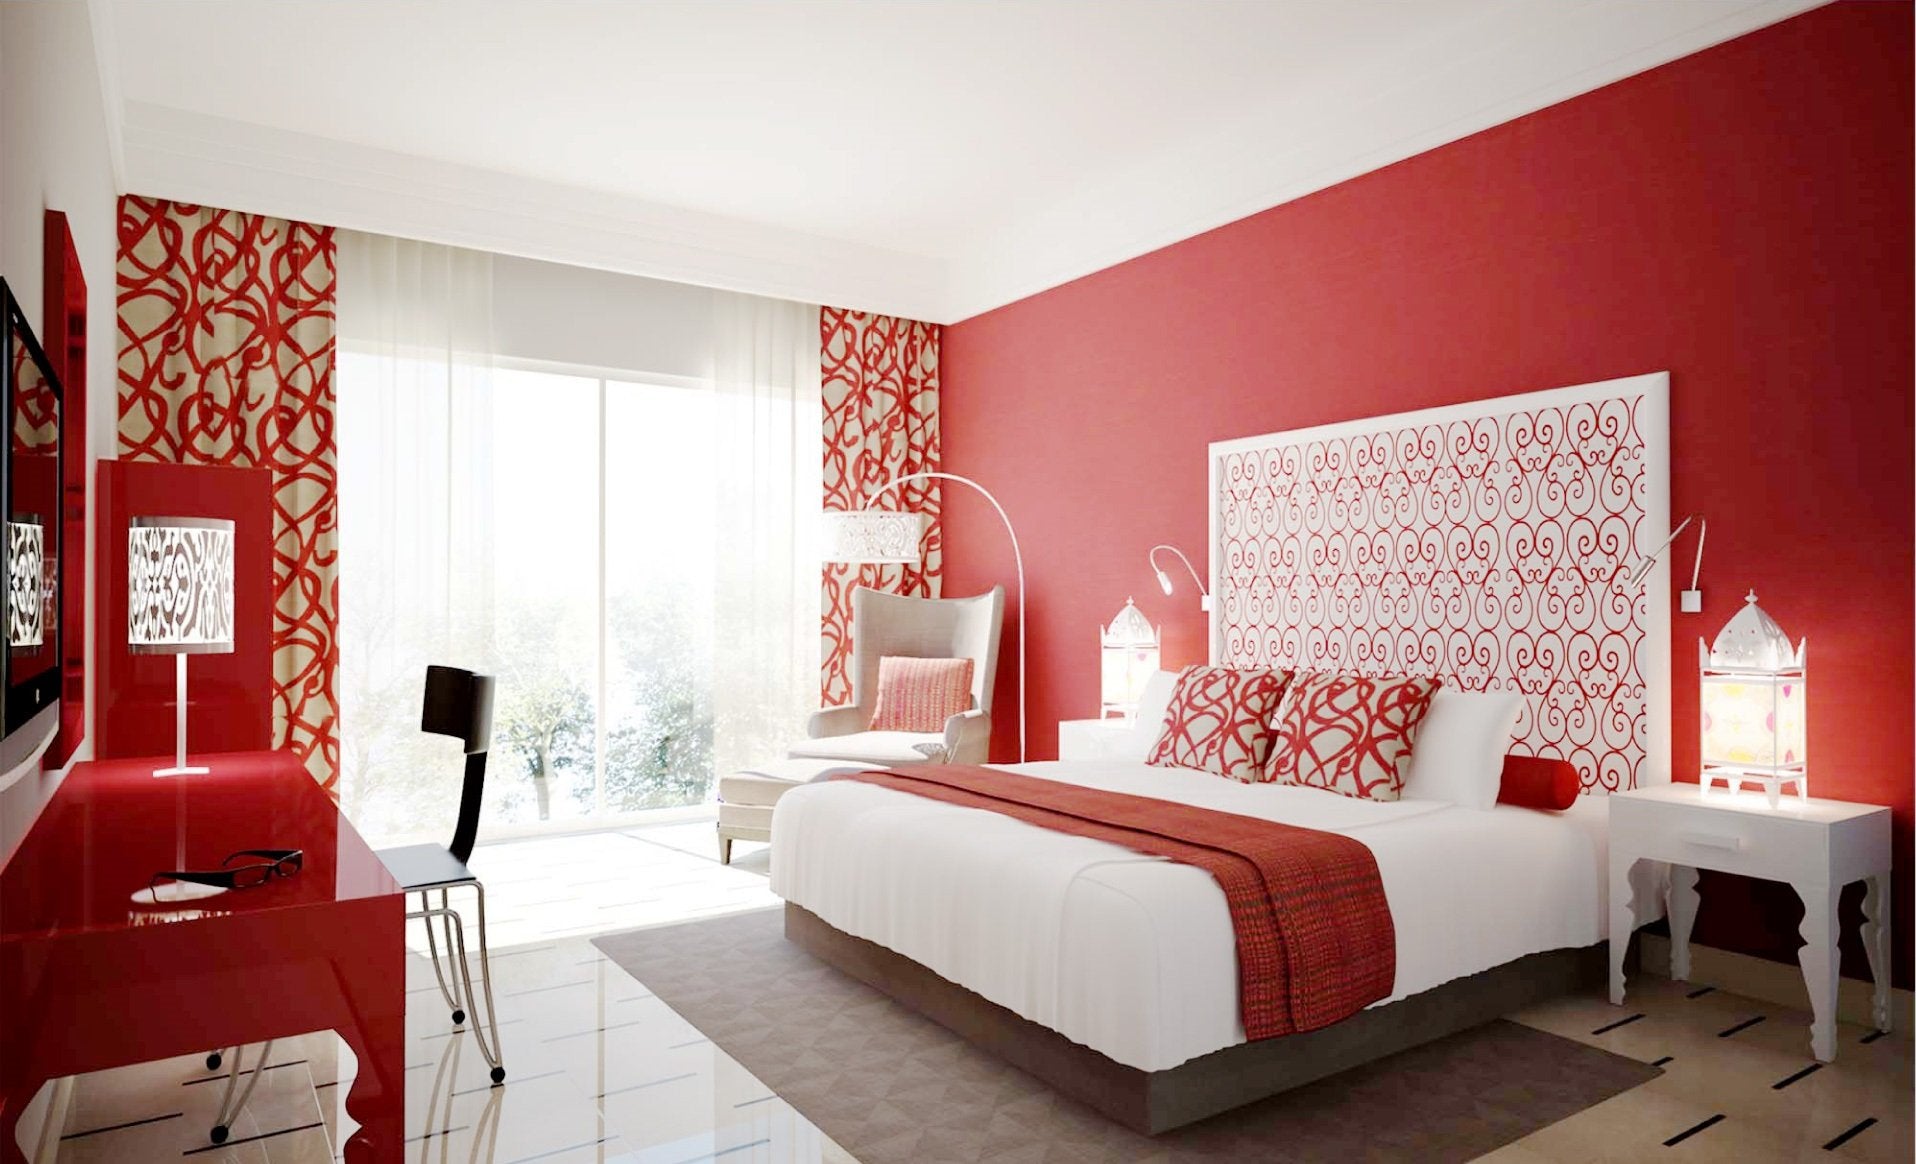 Photos Of Bedrooms With Red Decor